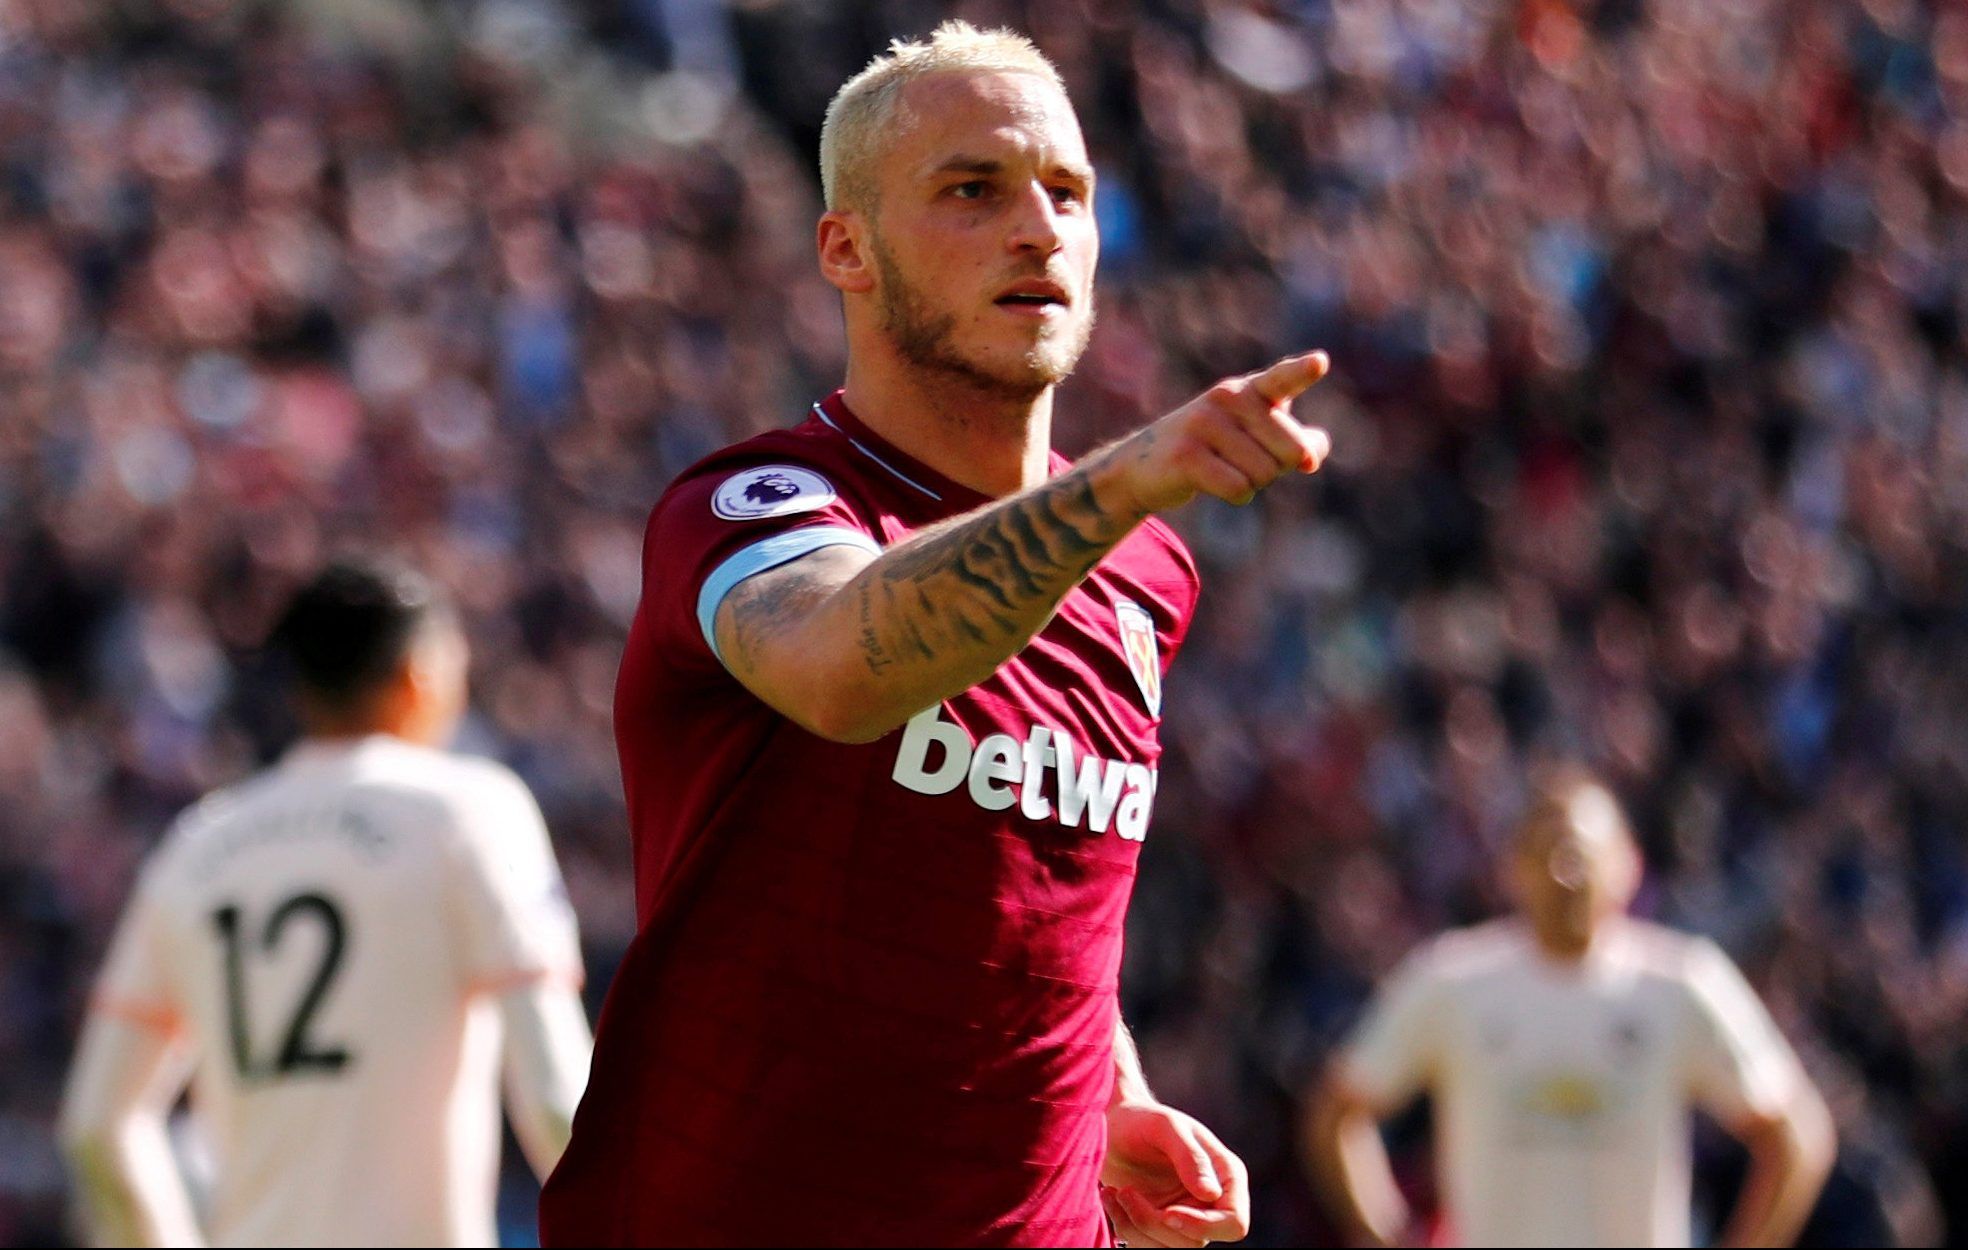 Soccer Football - Premier League - West Ham United v Manchester United - London Stadium, London, Britain - September 29, 2018  West Ham's Marko Arnautovic celebrates scoring their third goal   REUTERS/Eddie Keogh  EDITORIAL USE ONLY. No use with unauthorized audio, video, data, fixture lists, club/league logos or 